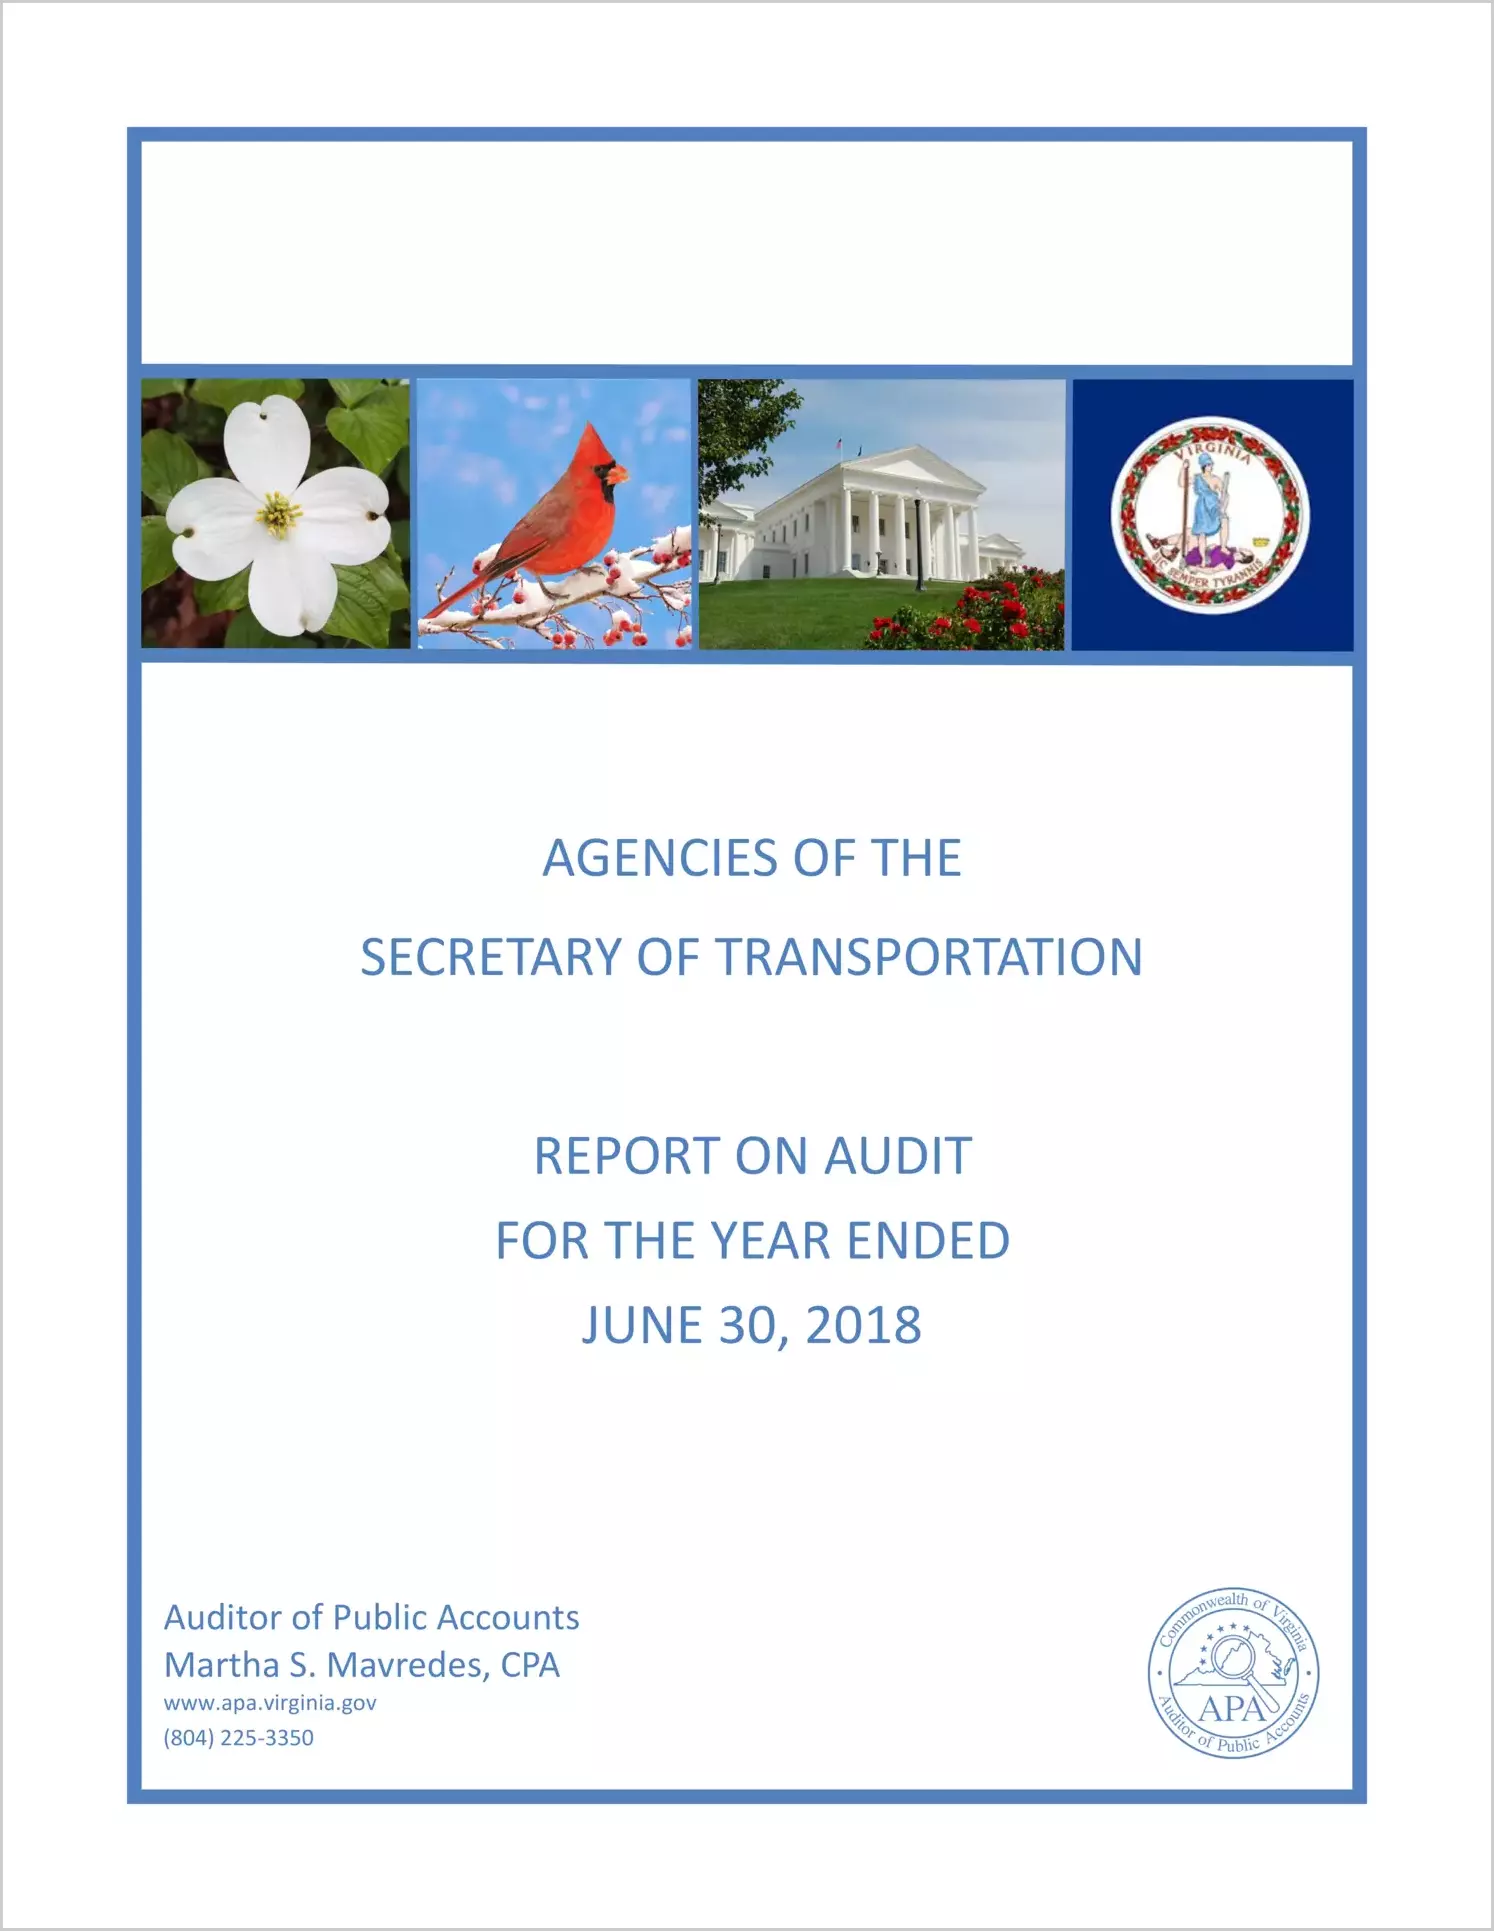 Agencies of the Secretary of Transportation for the year ended June 30, 2018